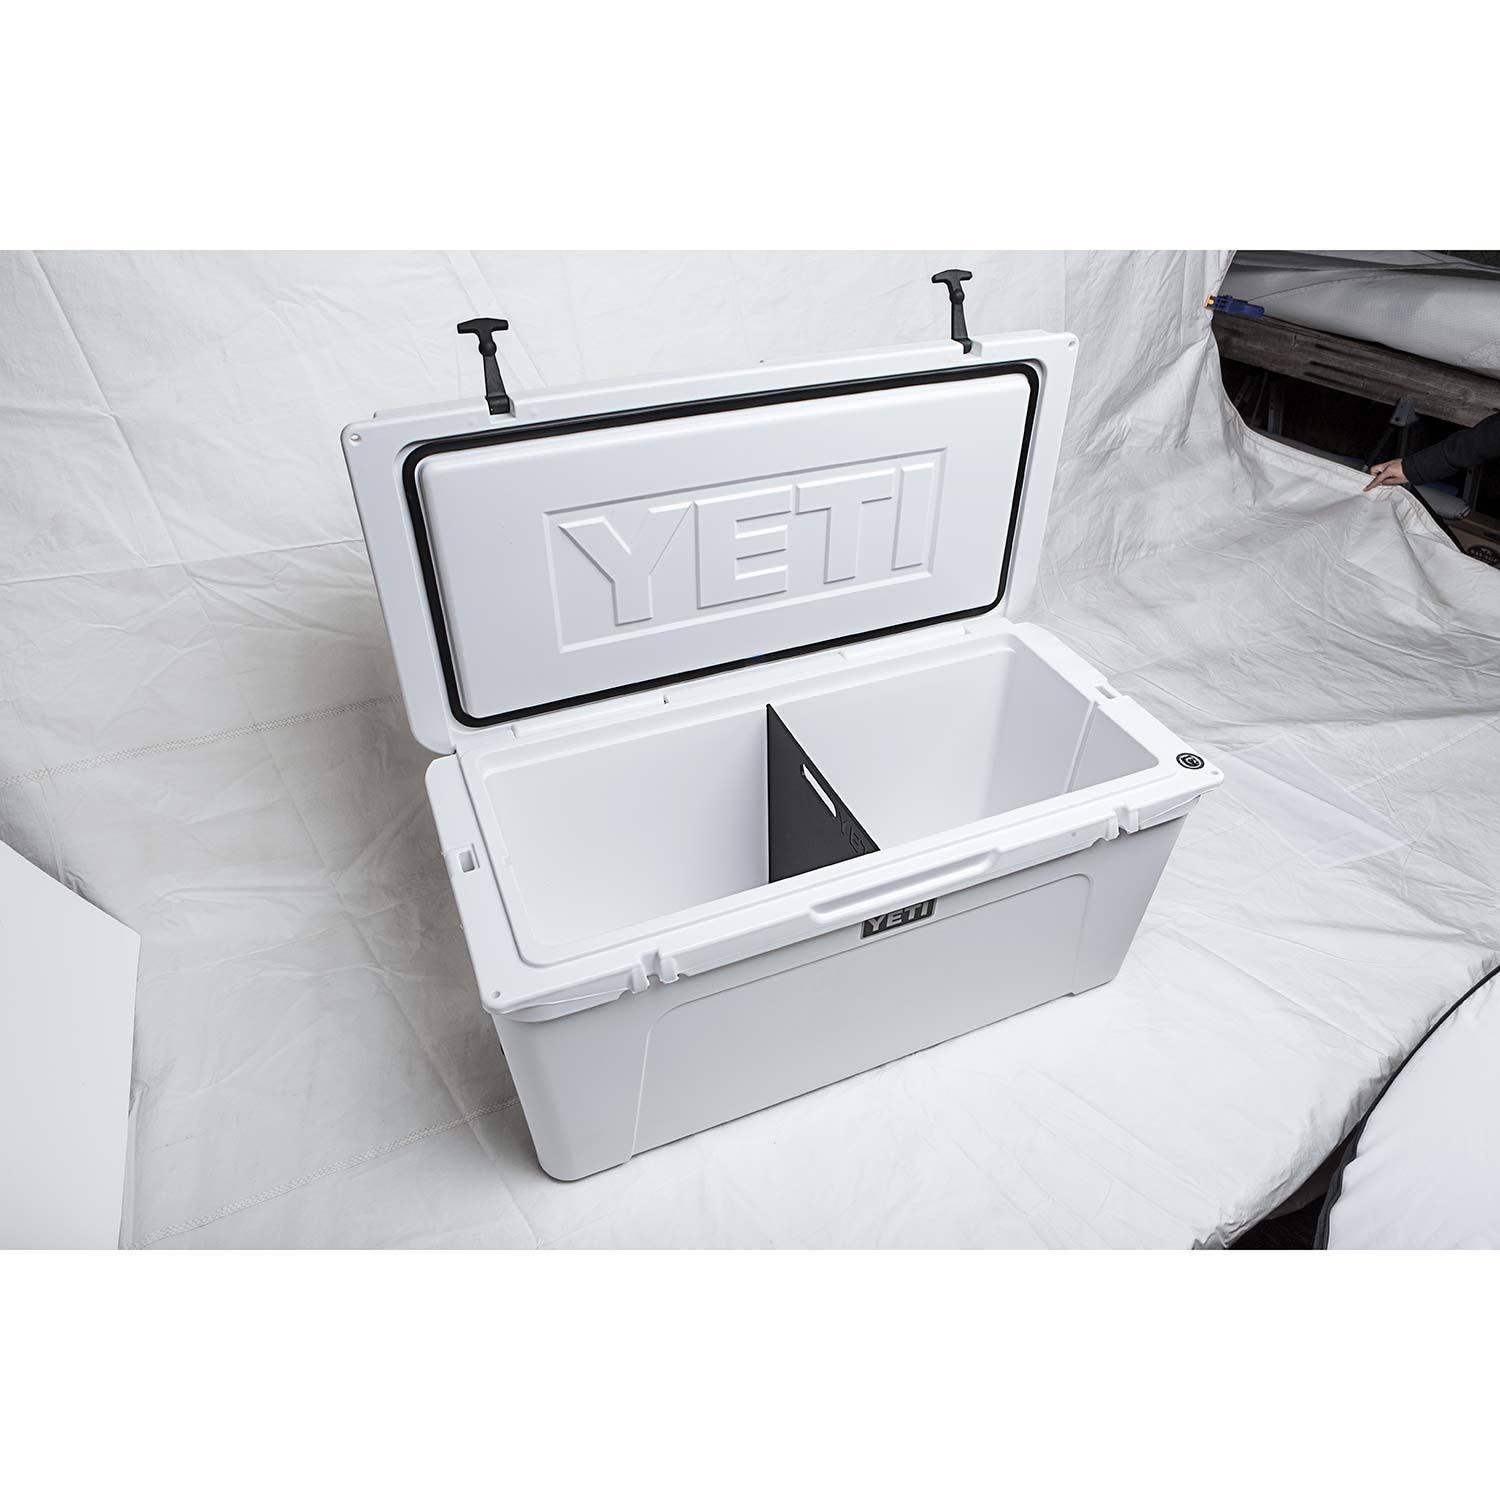 Grippi - Cooler Divider & Cutting Board Compatible with The Yeti Tundra 65 - Improved